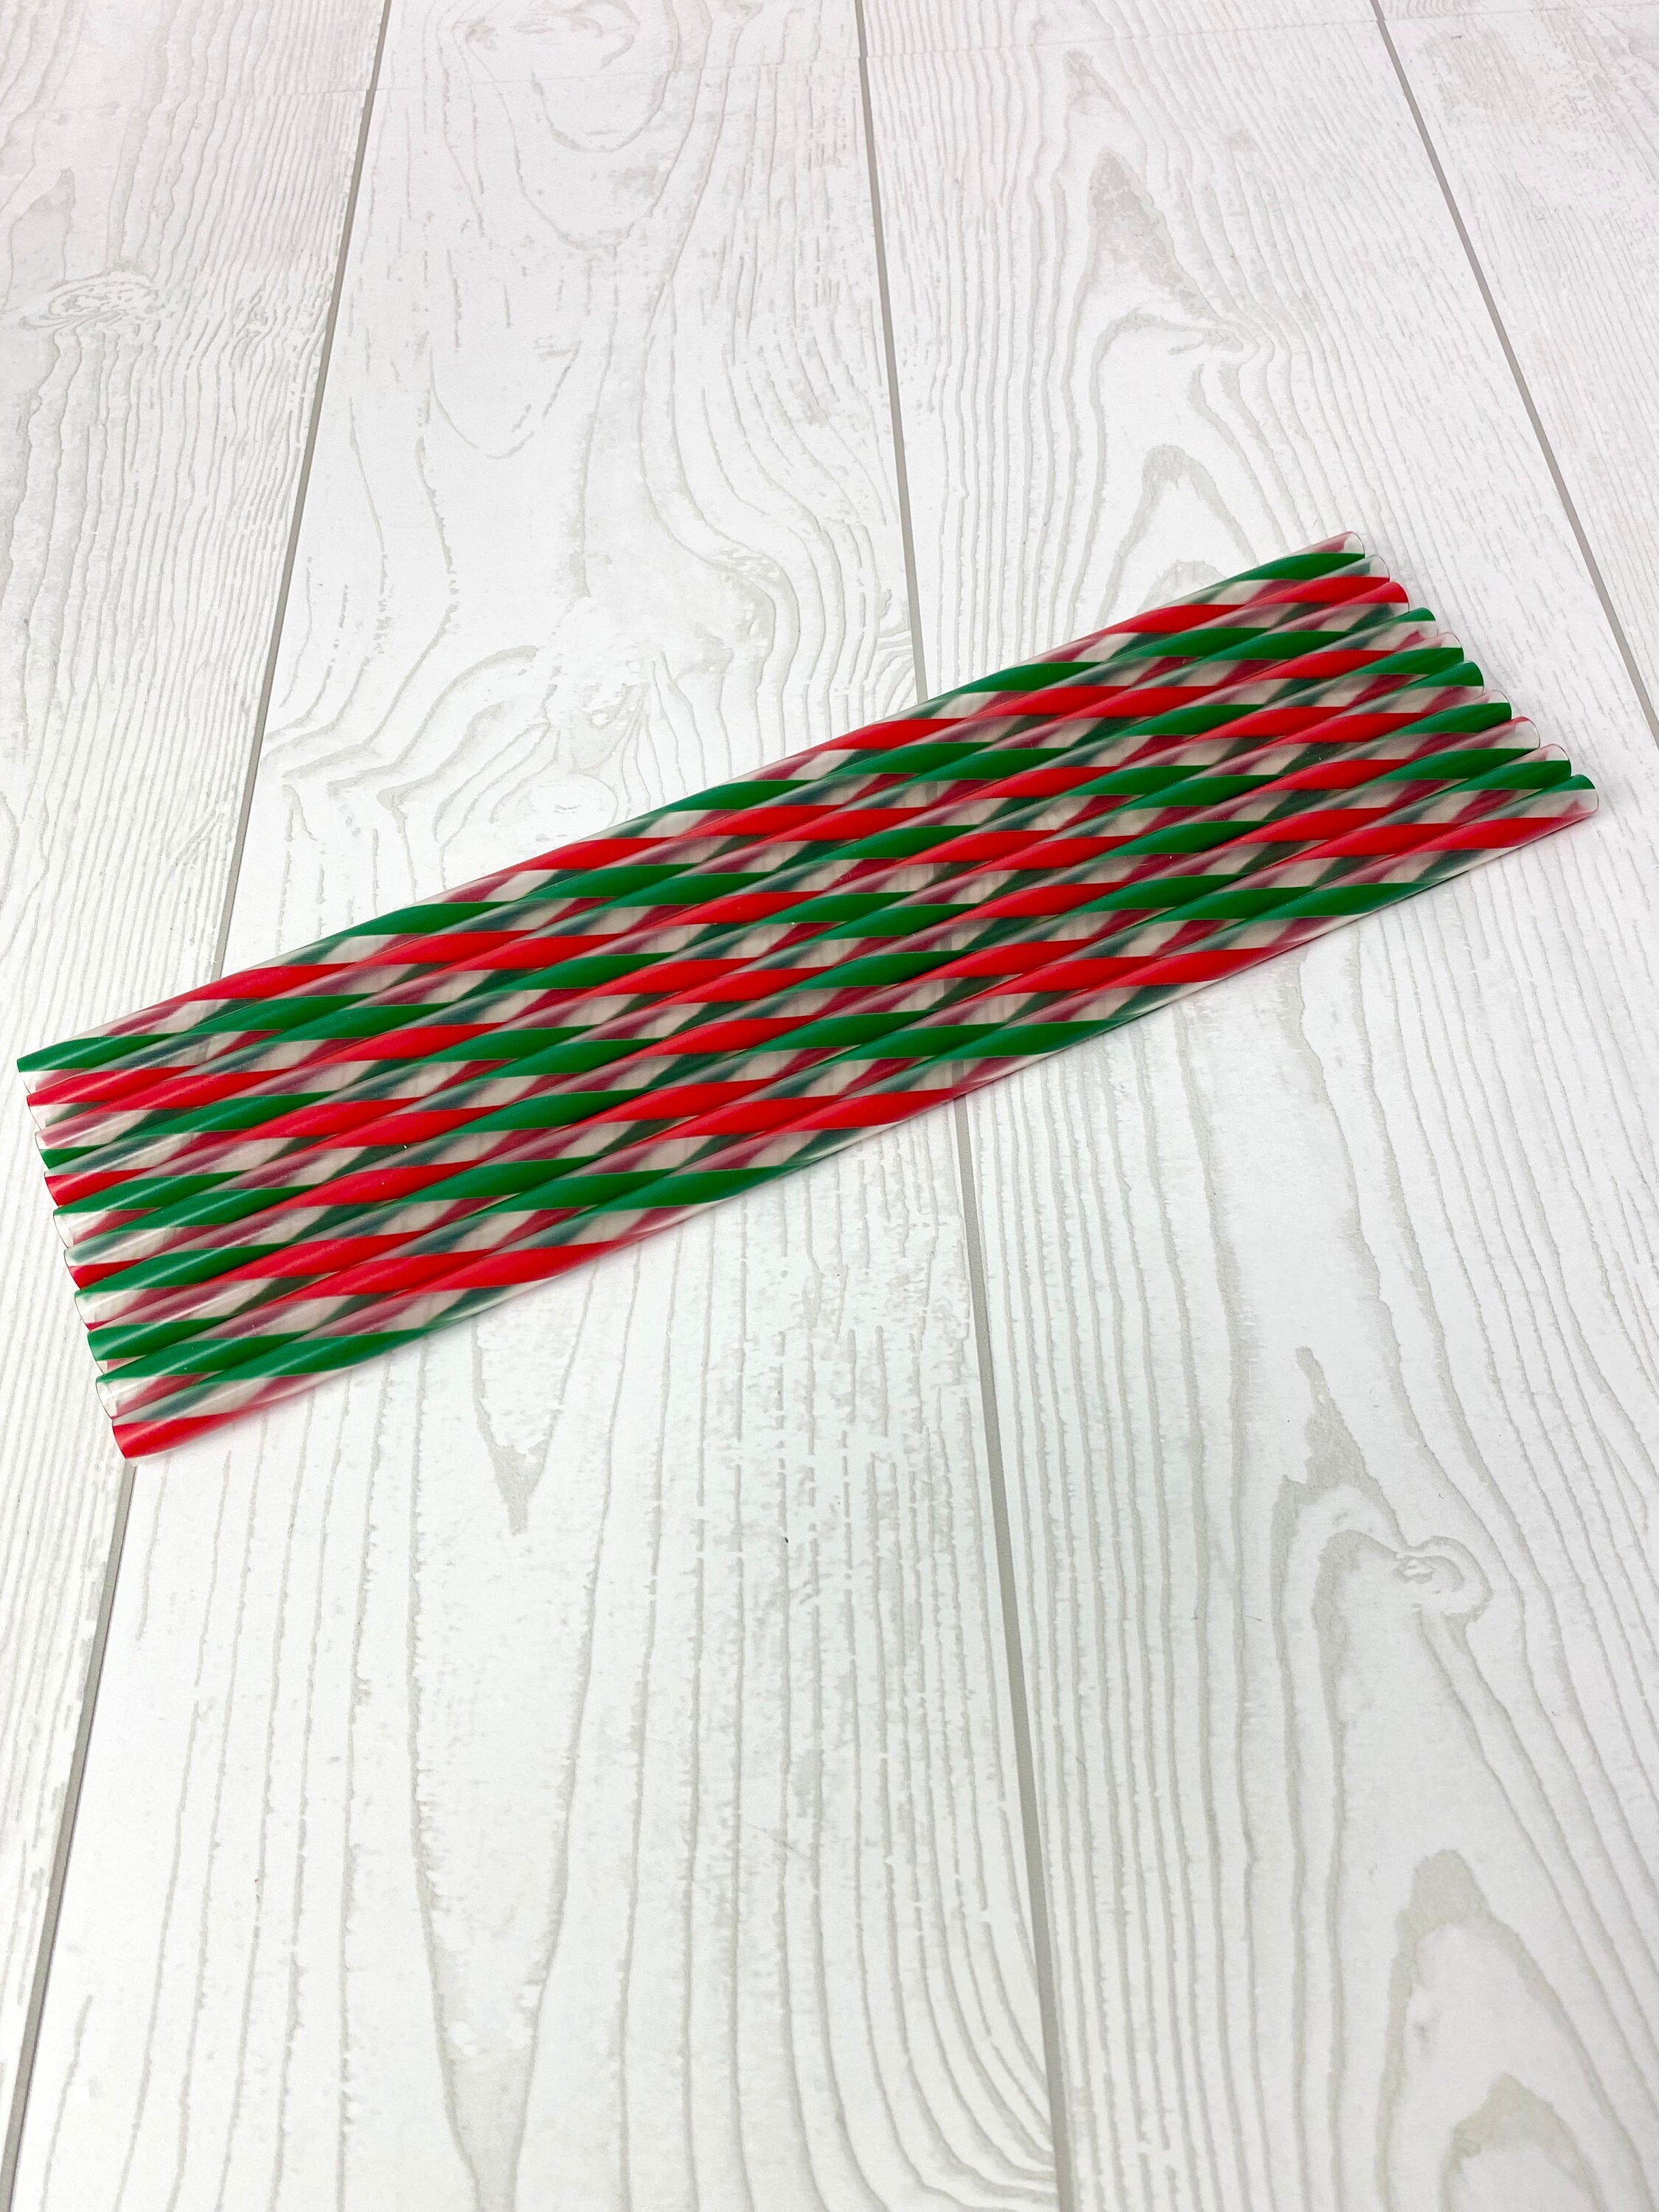 10 Red / Green Plastic Reusable Drinking Straws - 10 - Party -  Entertaining - Christmas - Holiday